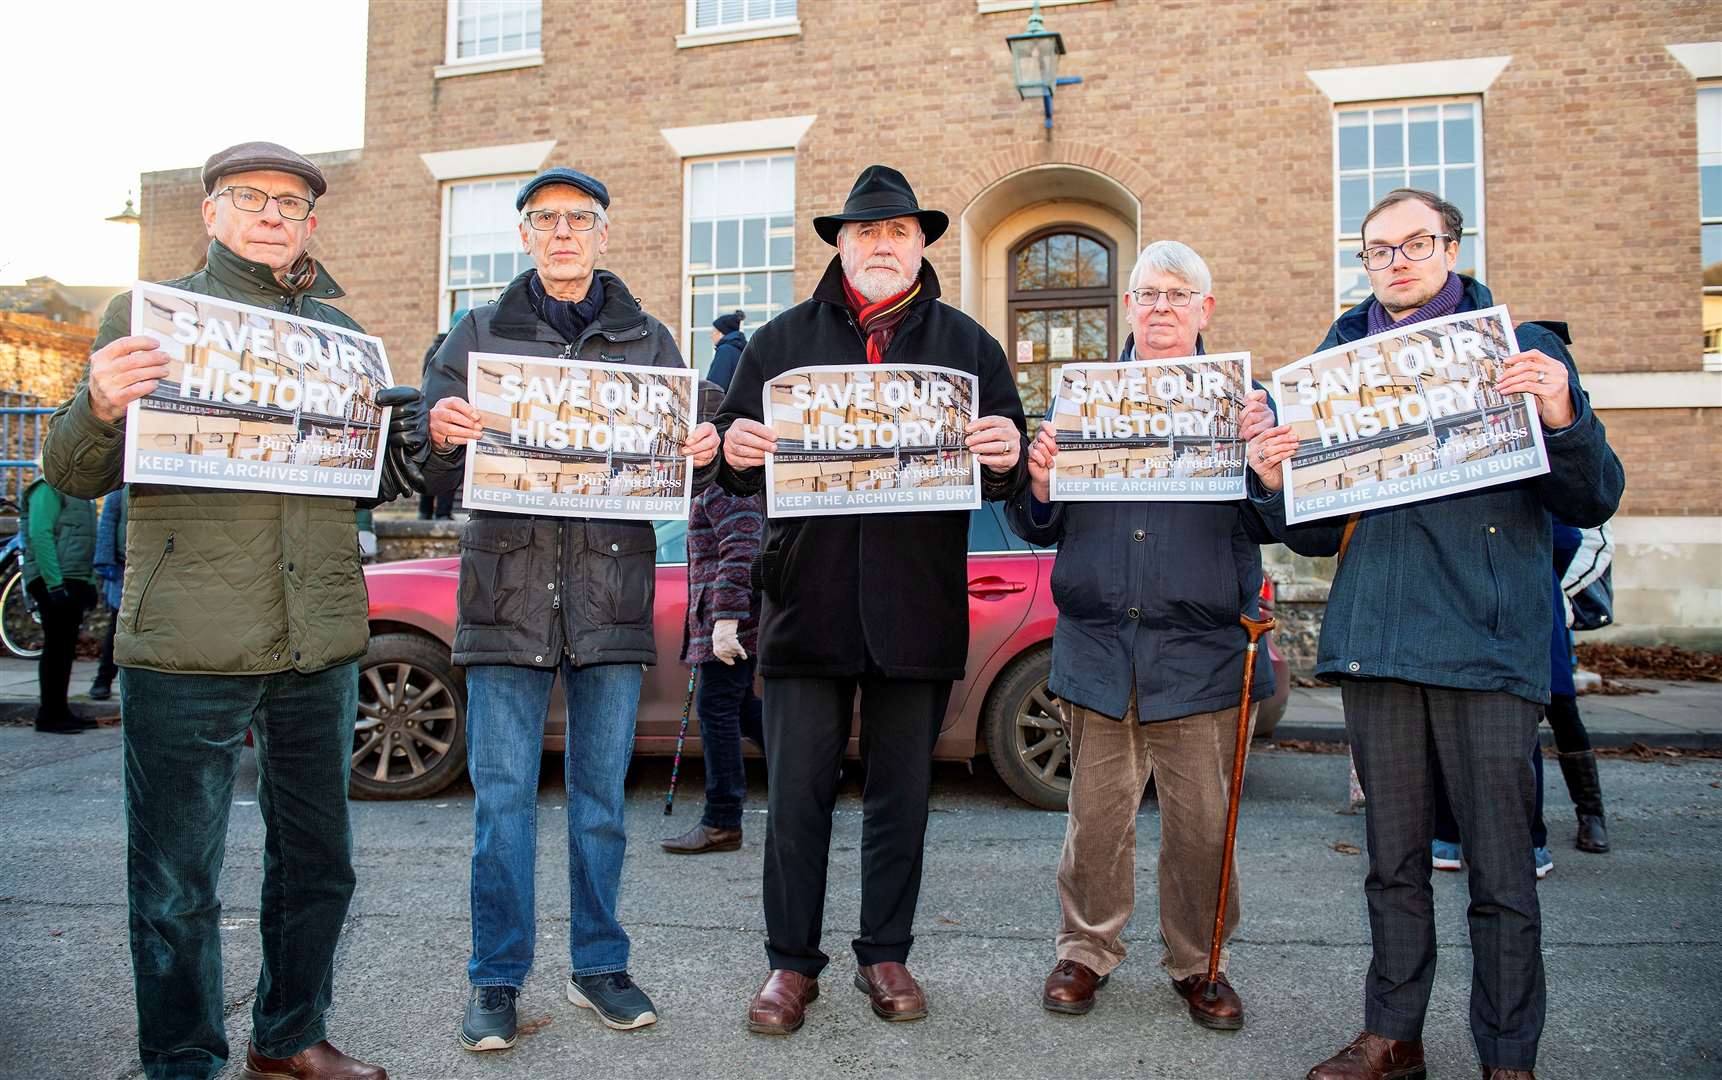 Suffolk News (Bury Free Press) launched it’s campaign this week. Picture by Mark Westley